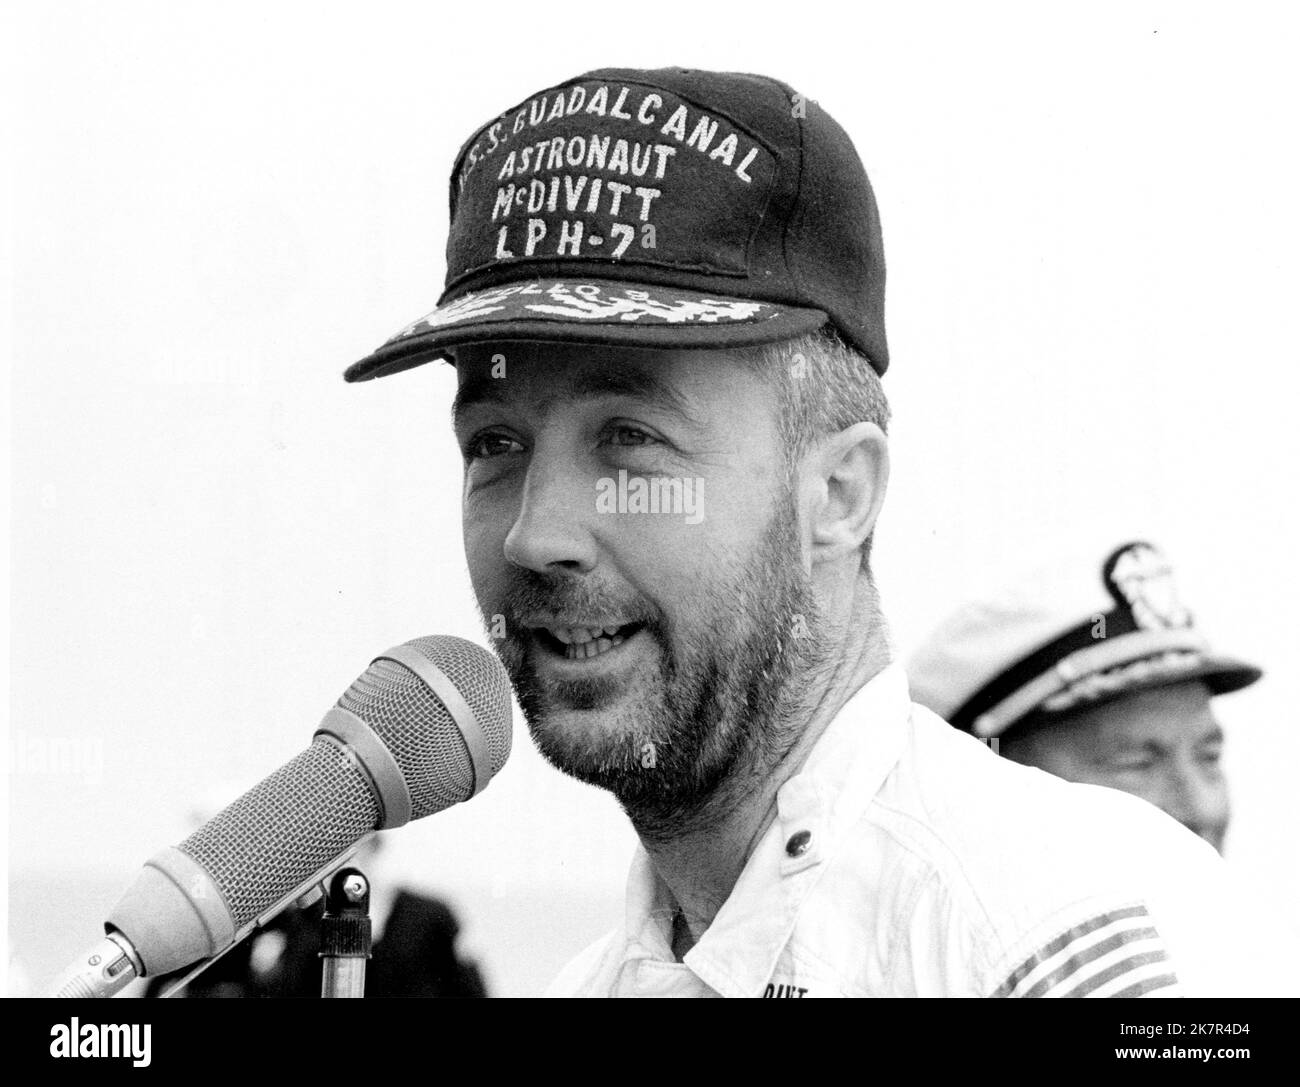 USS Guadalcanal, United States. 13th Mar, 1969. NASA Apollo 9 mission commander James McDivitt speaks to personnel aboard the USS Guadalcanal following Splashdown in the Atlantic Ocean, March 13, 1969 off the coast of Florida. McDivitt commanded the first Gemini spacewalk mission and commanded Apollo 9 during the first crewed orbital flight of a the lunar module, died October 15, 2022 at age 93. Credit: NASA/NASA/Alamy Live News Stock Photo